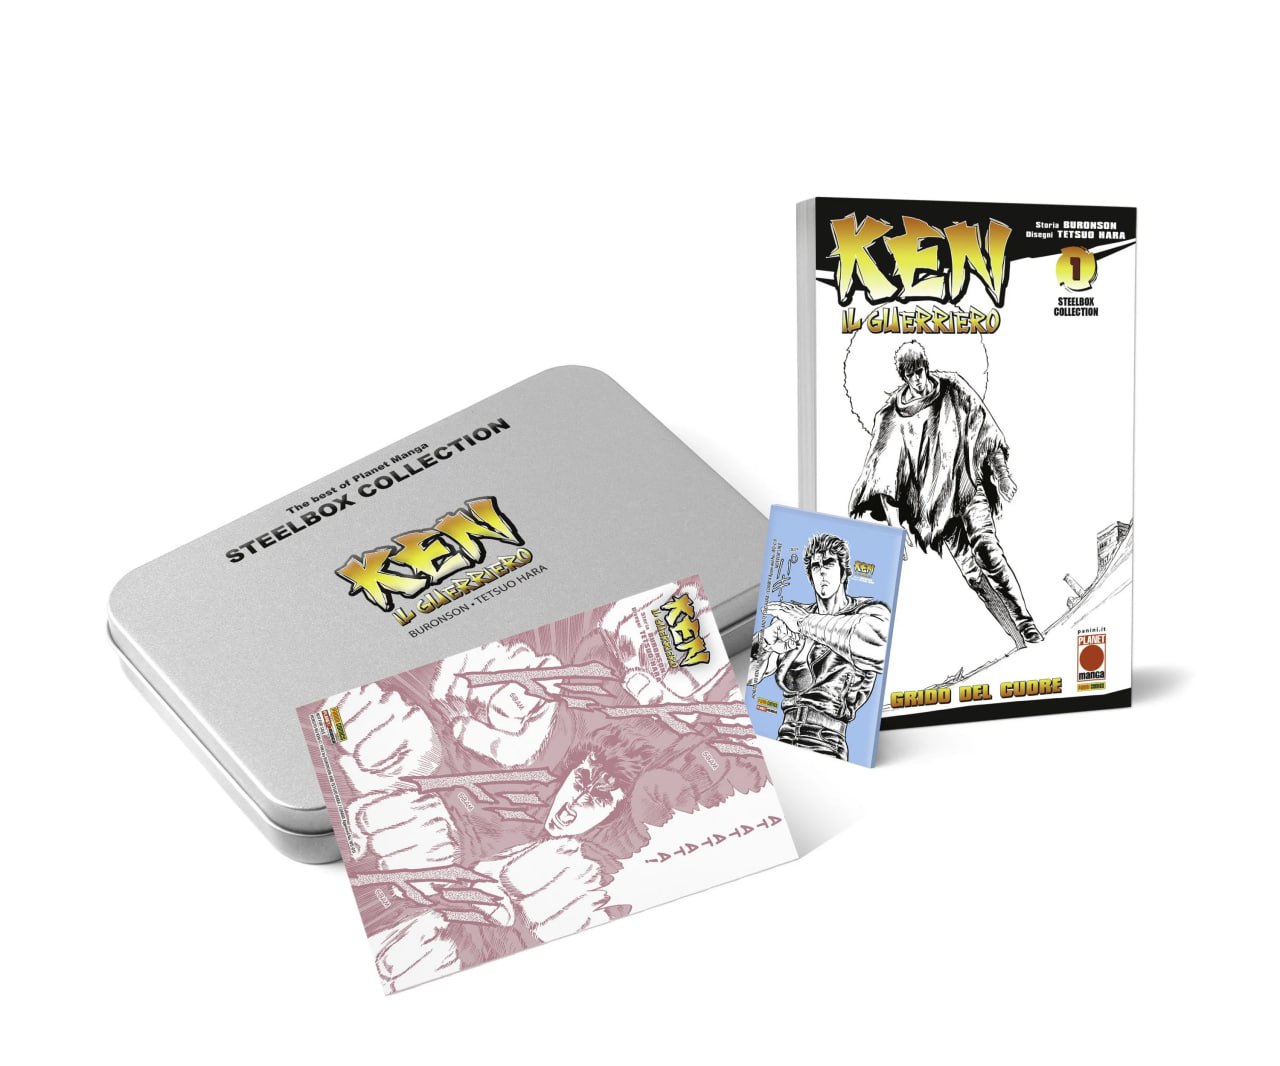 The Best of Planet Manga – Steelbox Collection: Ken il Guerriero